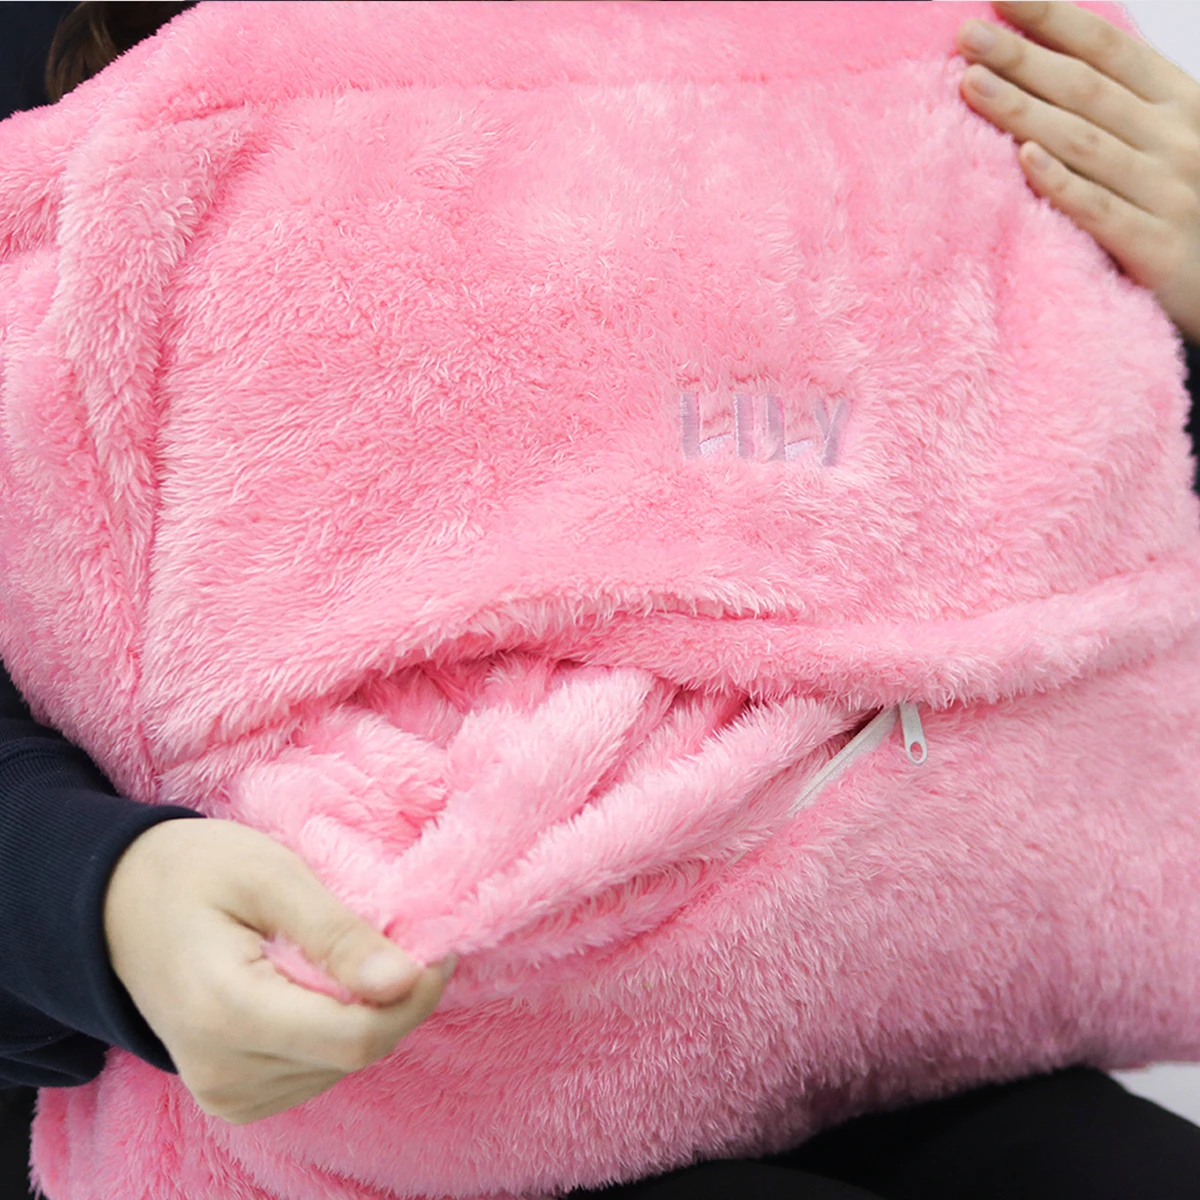 Lily Embroidery Plush Hand Warmer Pillow Blanket (Pink)